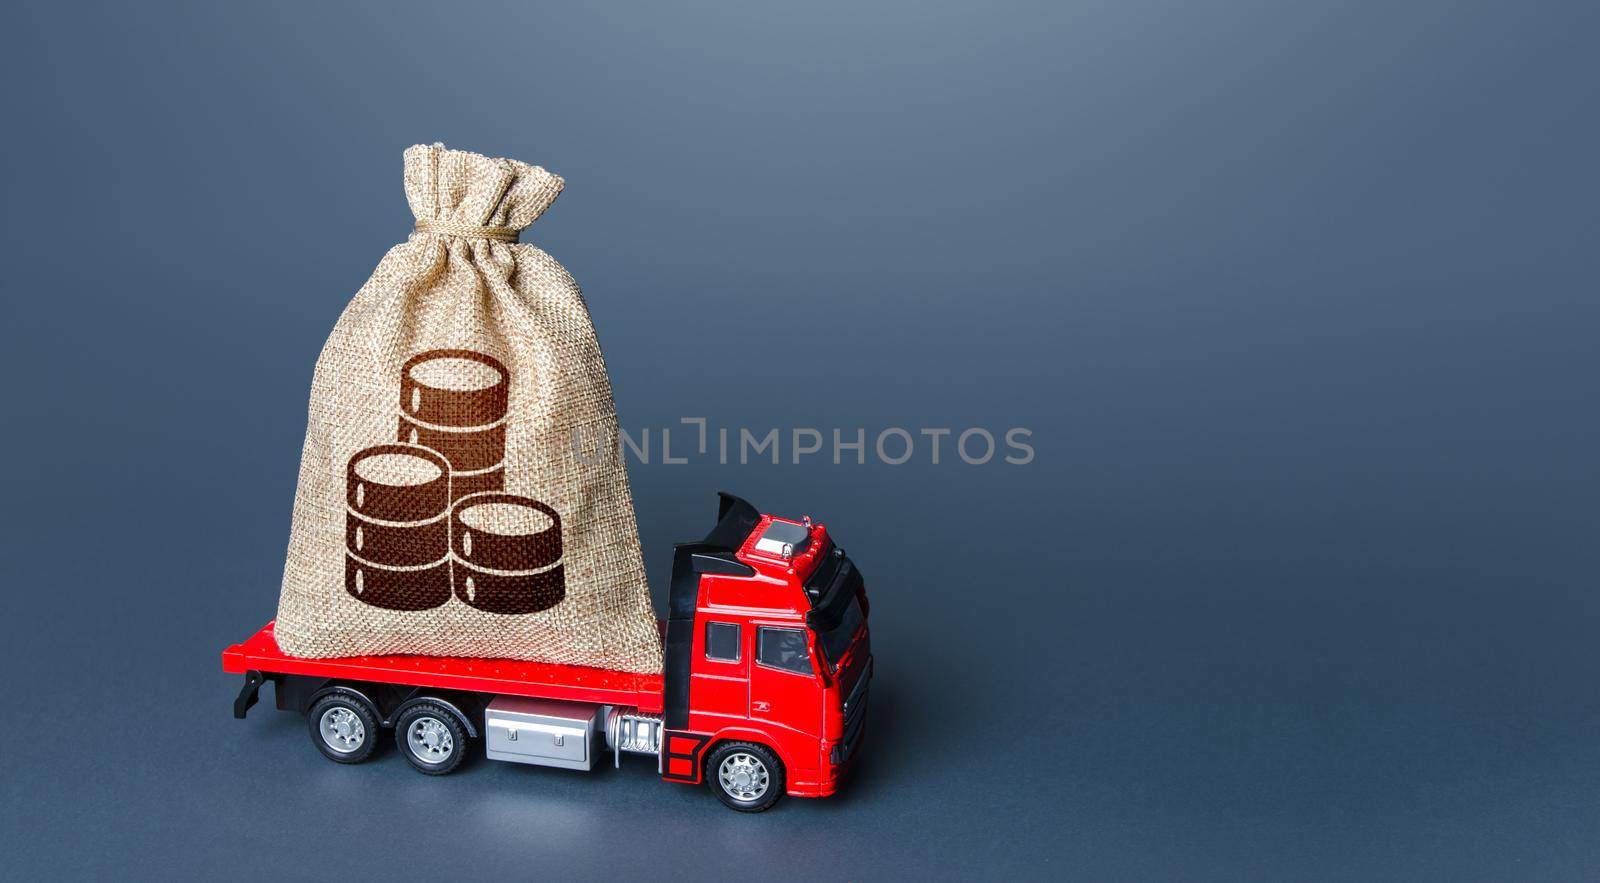 Truck with a money bag. Loan or deposit. Financial aid, investments and subsidies. Compensation. High super income. Payment of taxes. Debt load. Cash collection. Money transfers and transactions.